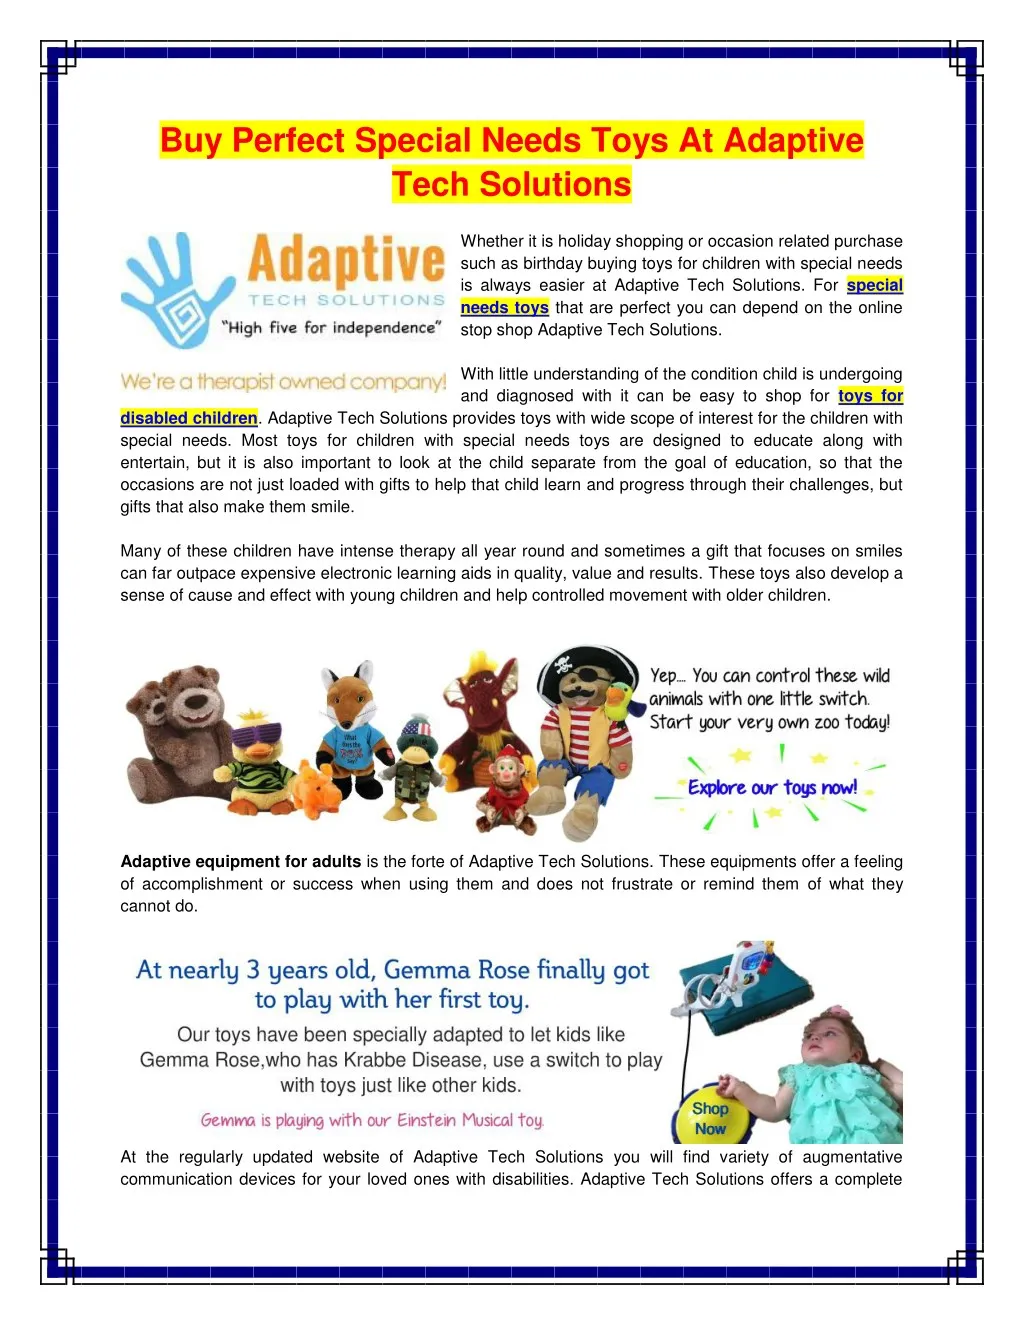 buy perfect special needs toys at adaptive tech